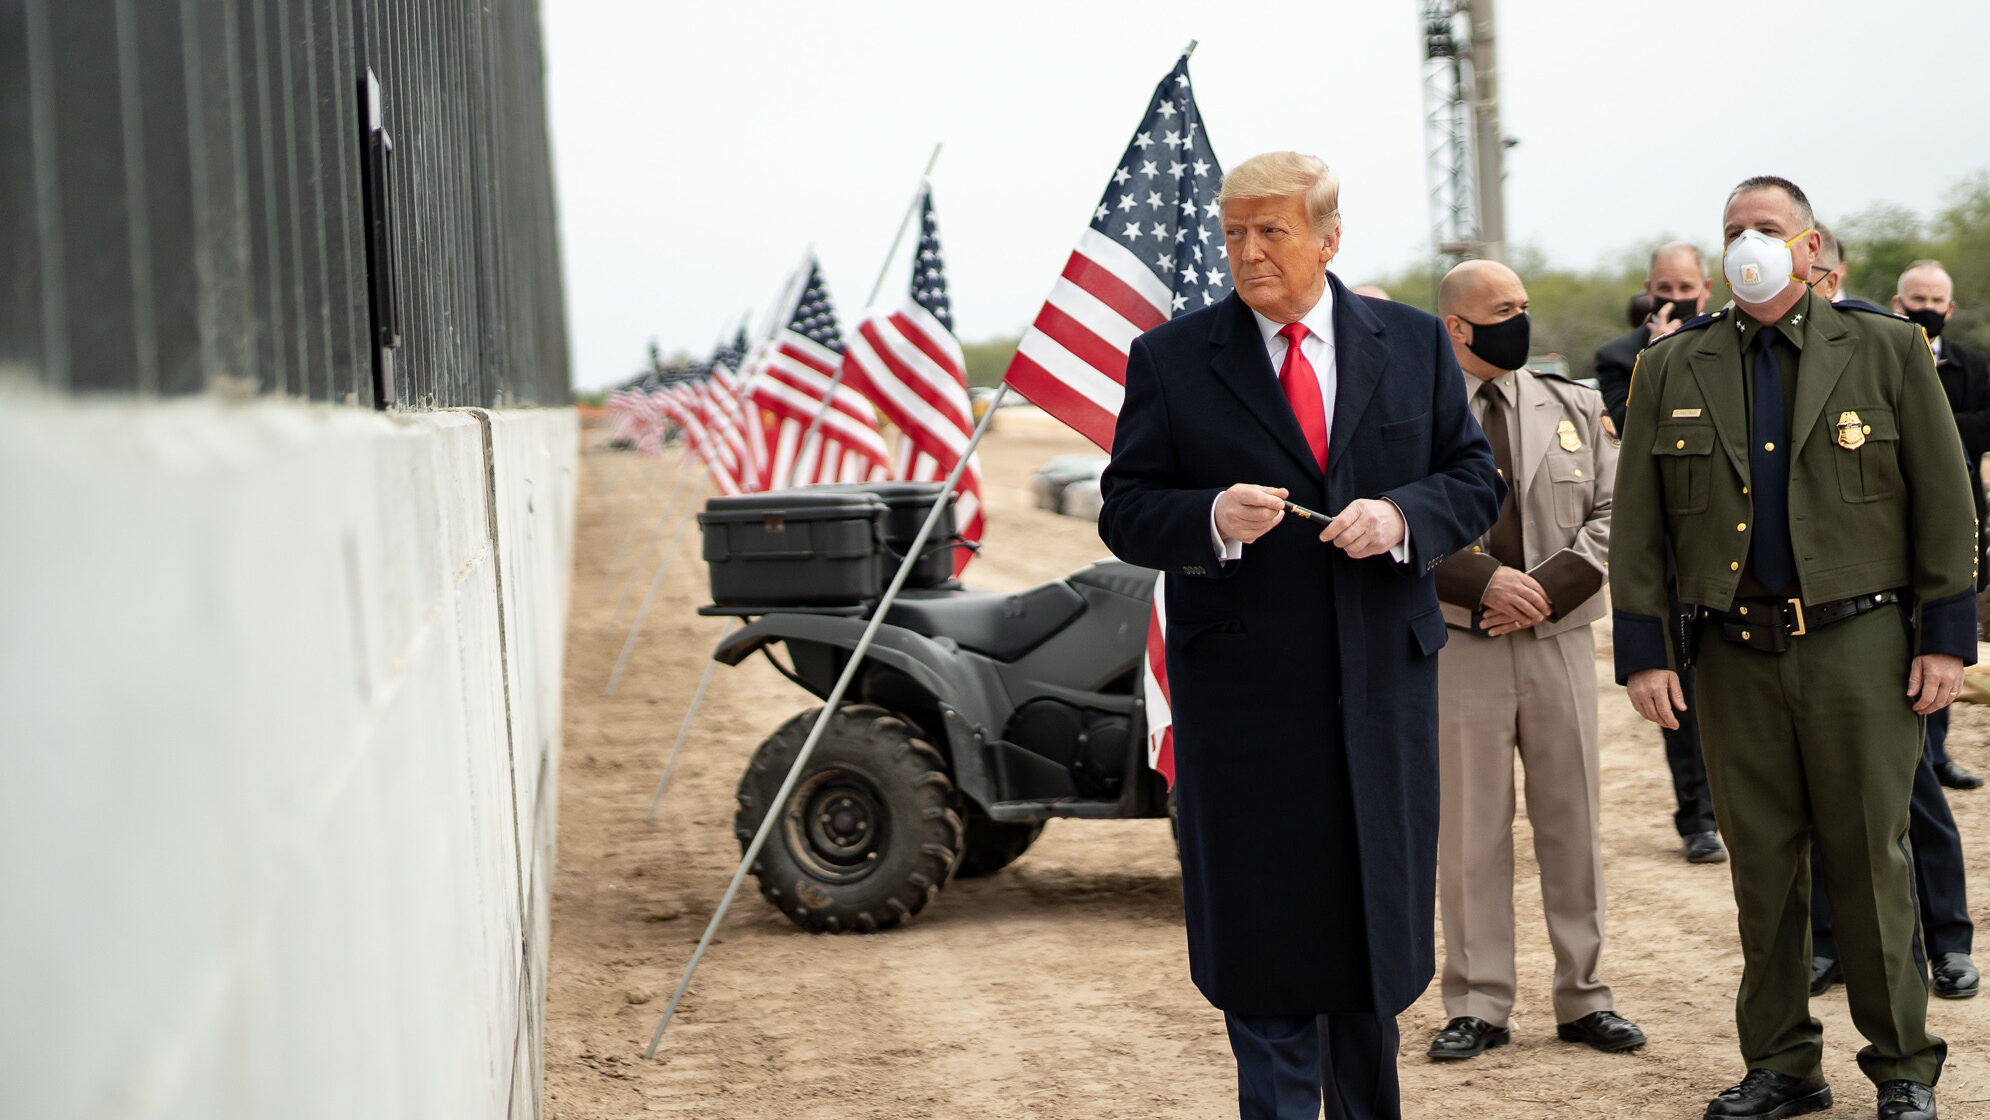 Trump Sweeps Texas With Double Biden's Votes After Border Visits